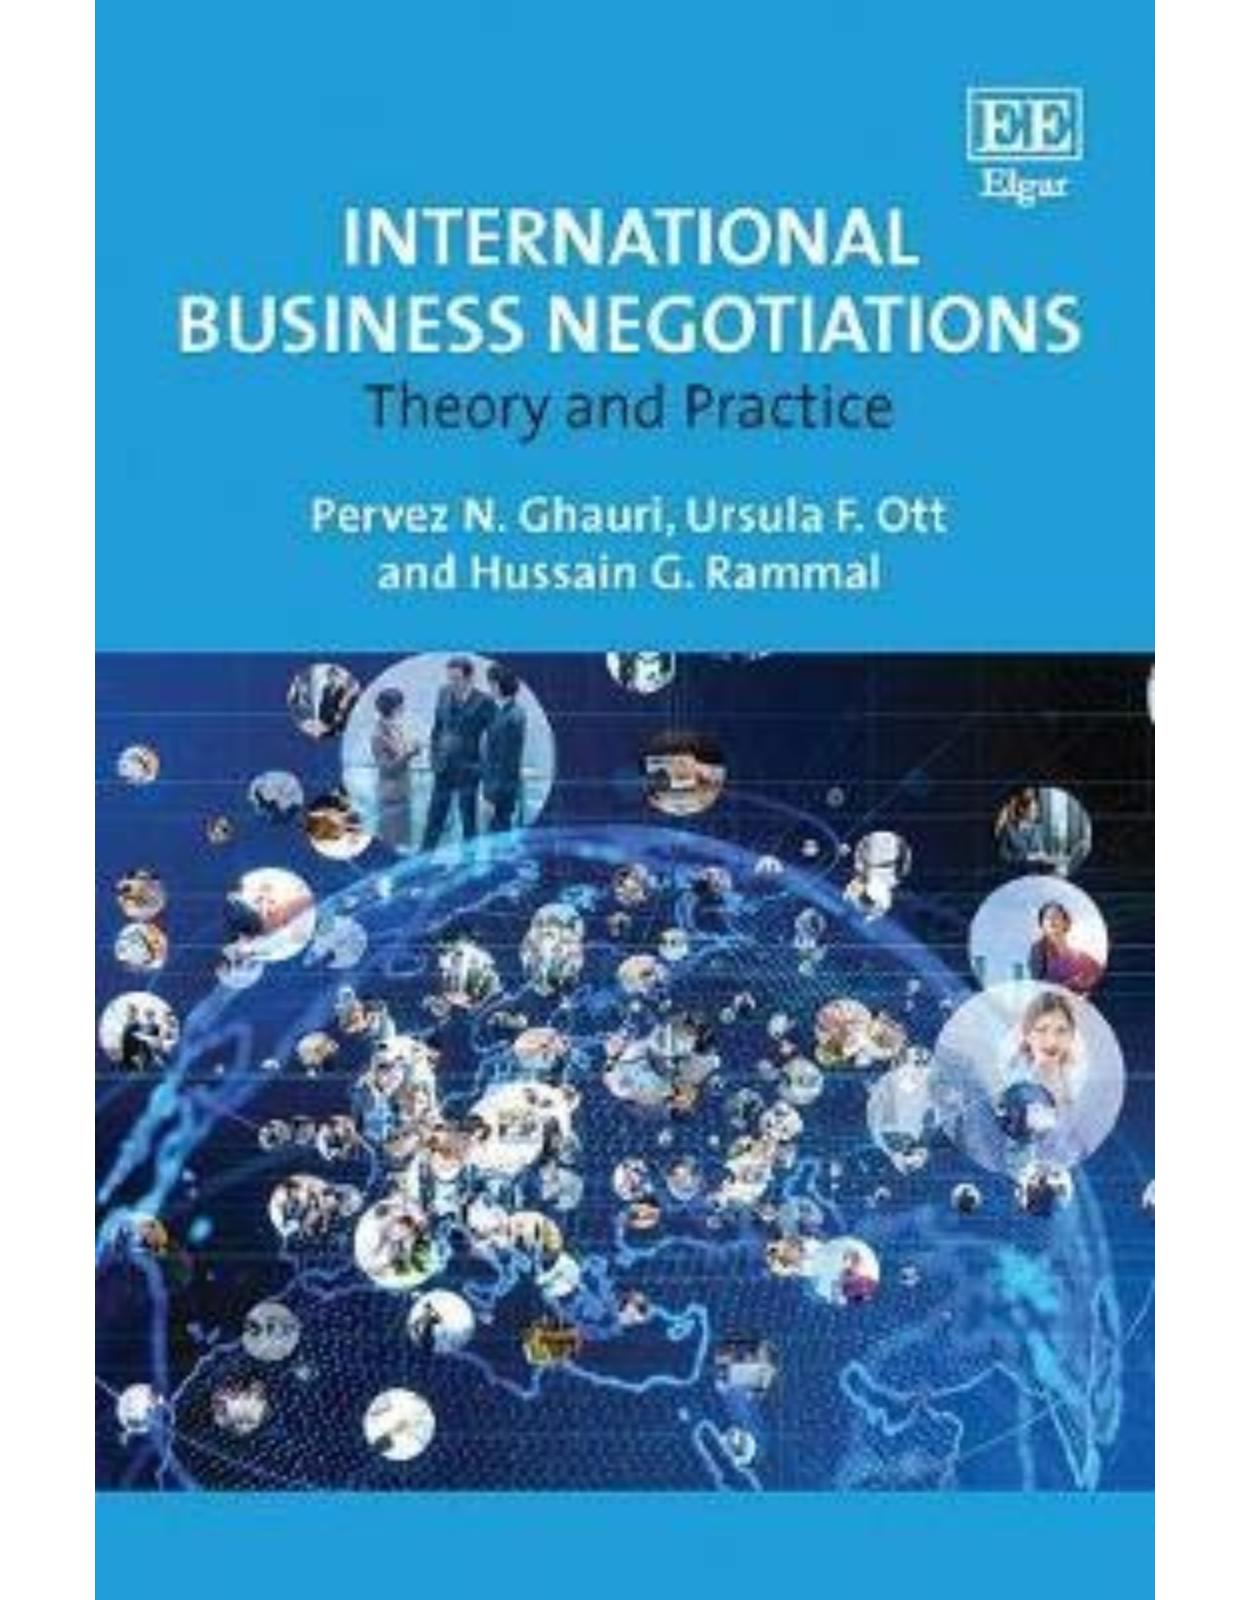 International Business Negotiations: Theory and Practice